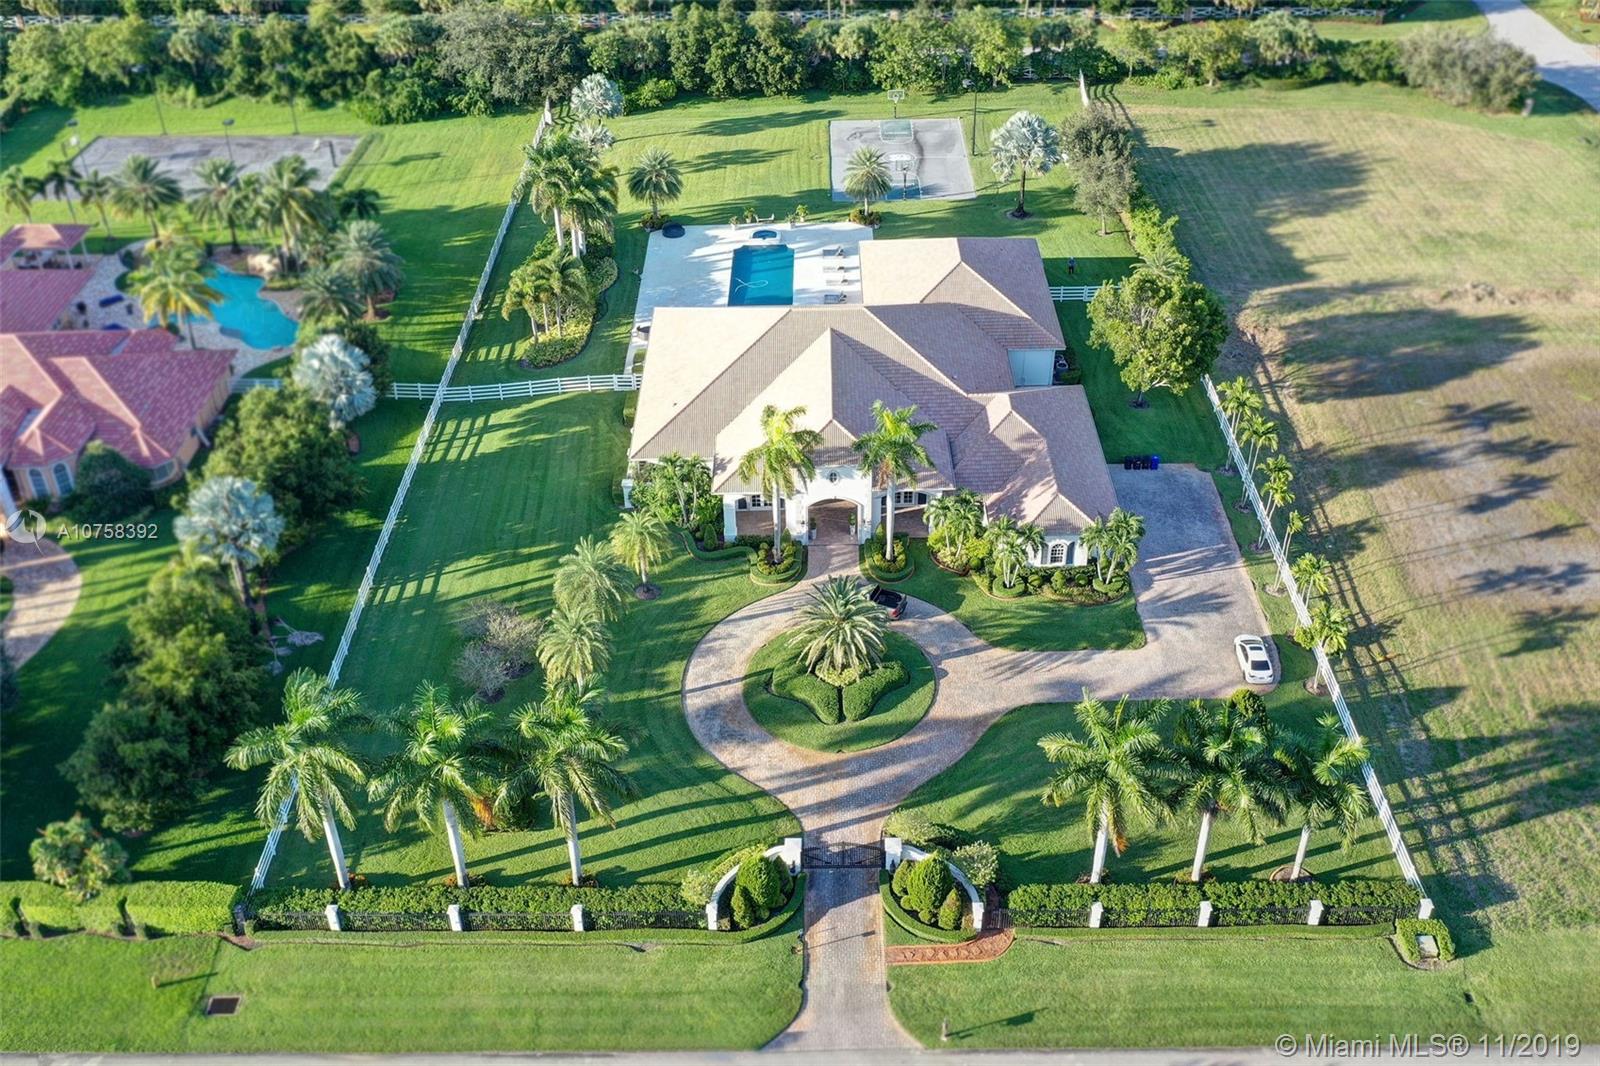 an aerial view of a house with a yard and lake view in back yard